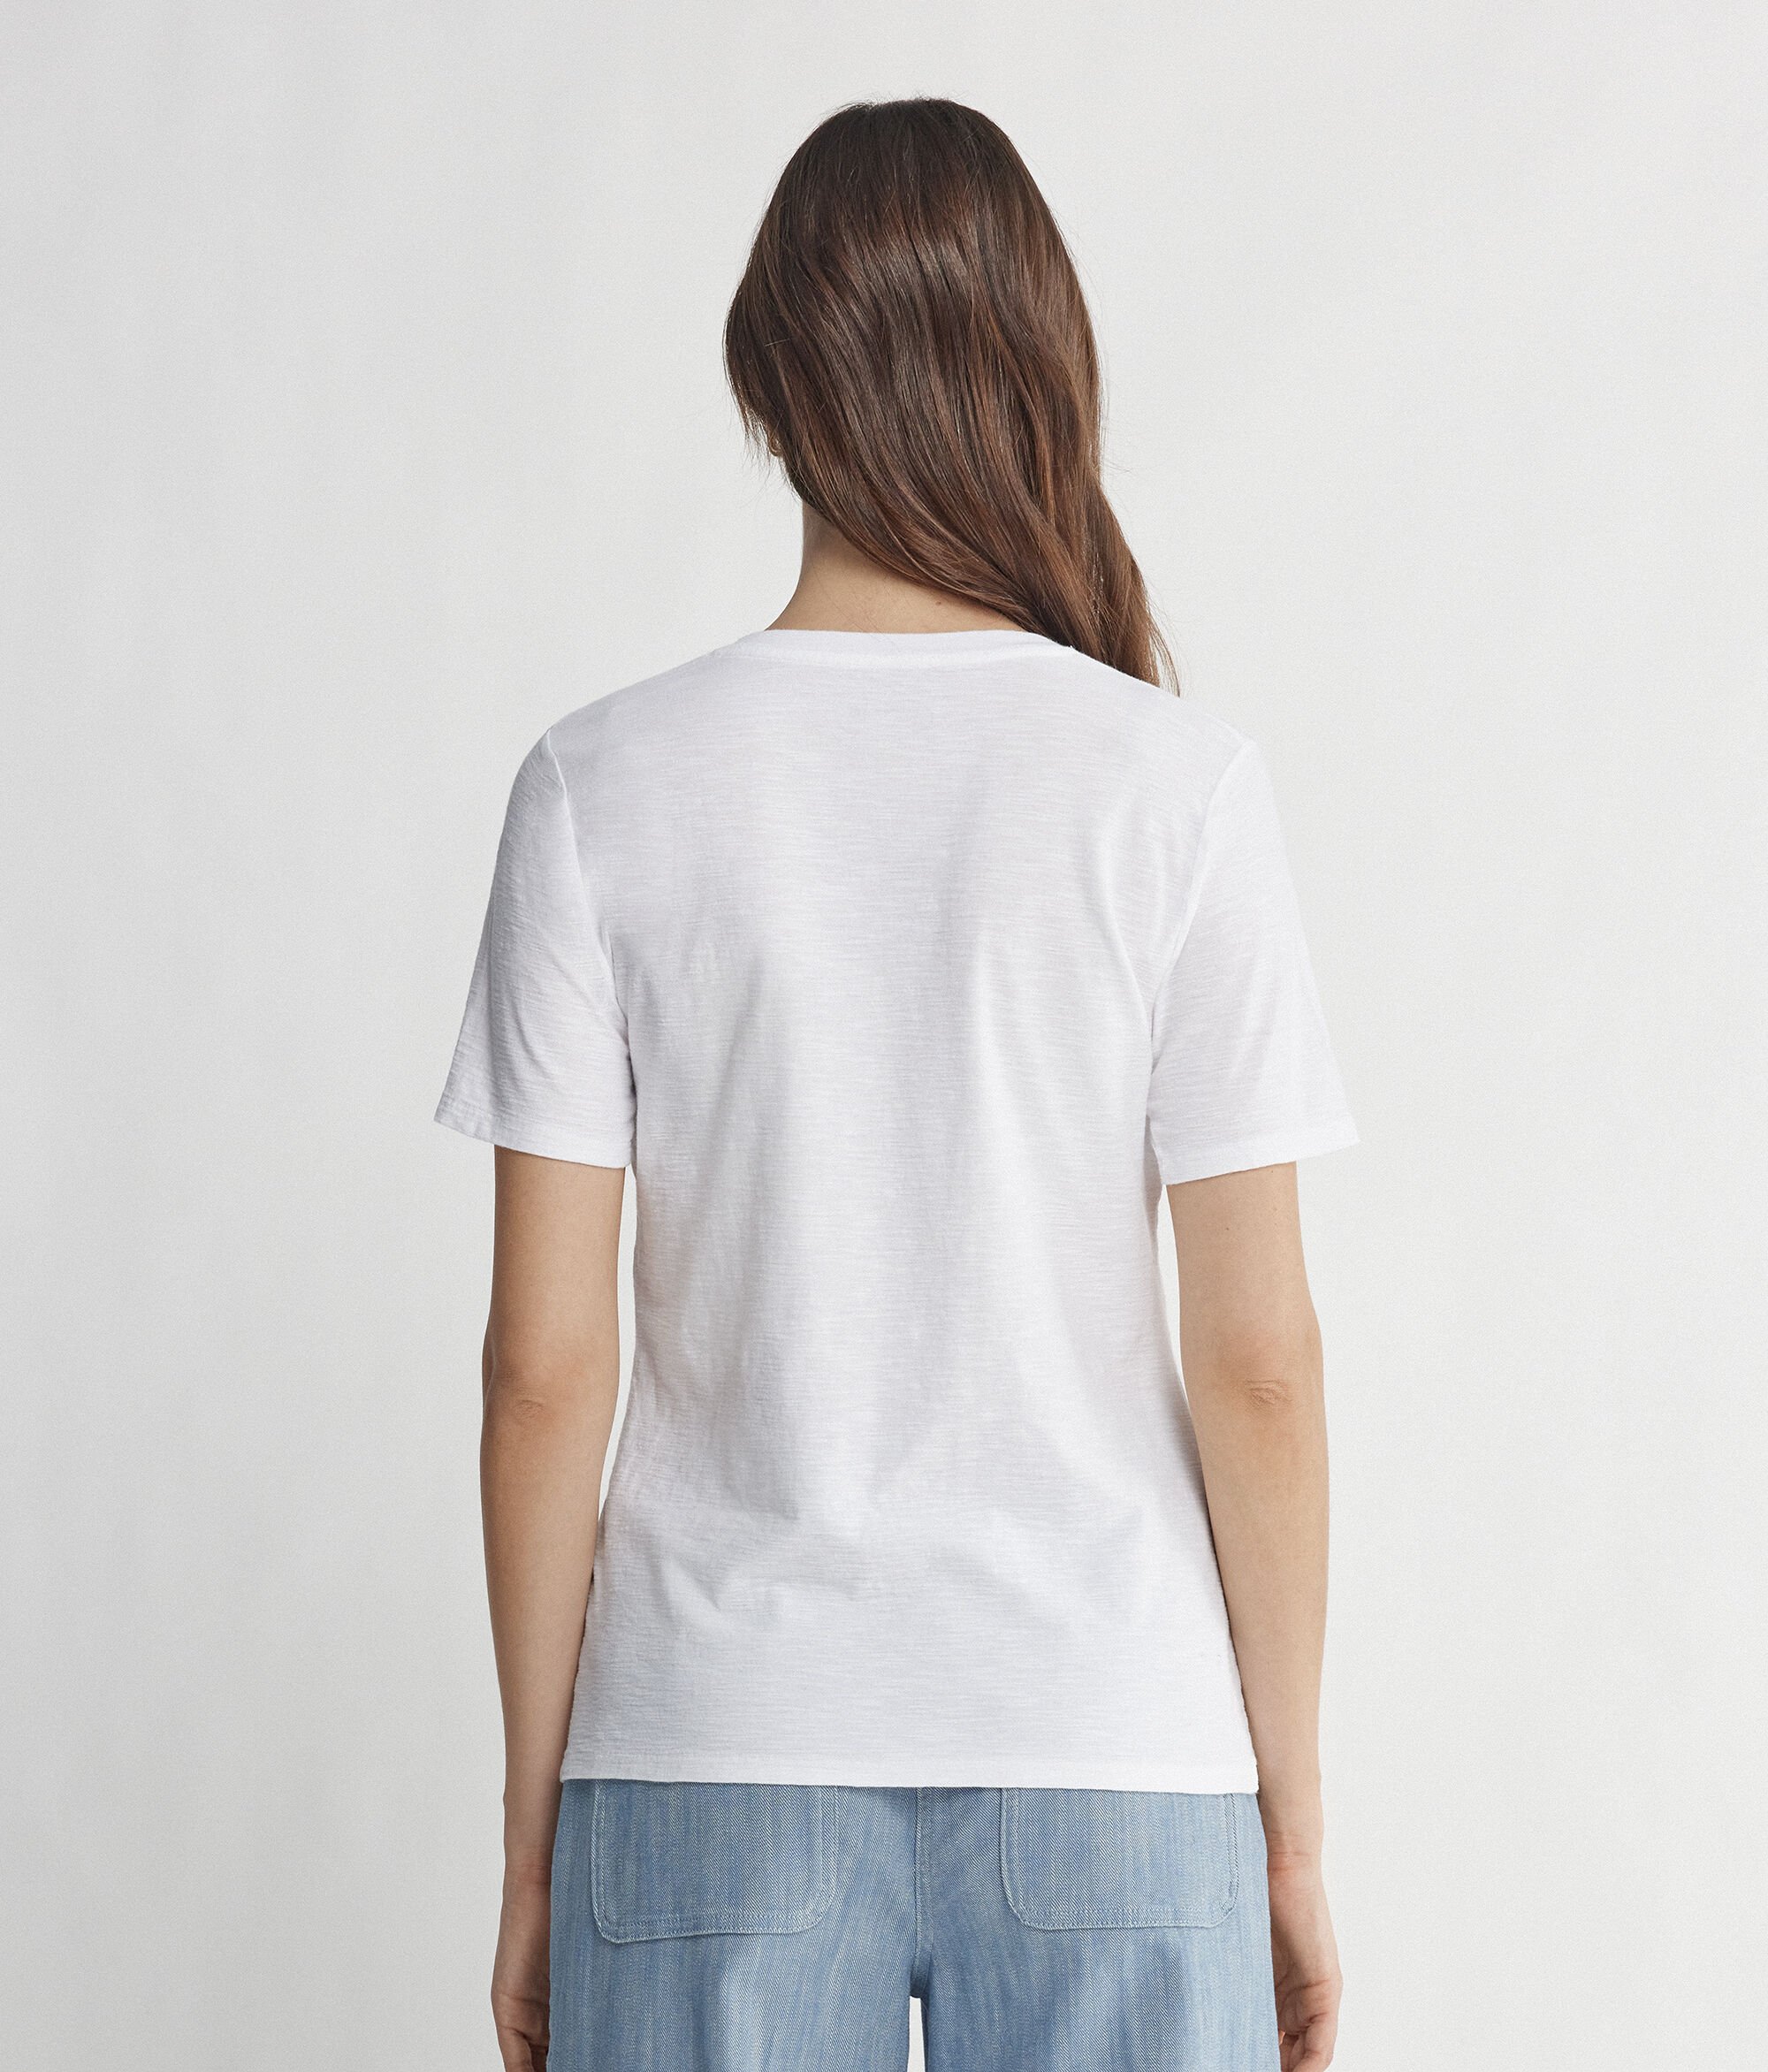 Cotton V-Neck T-Shirt with Short Sleeves